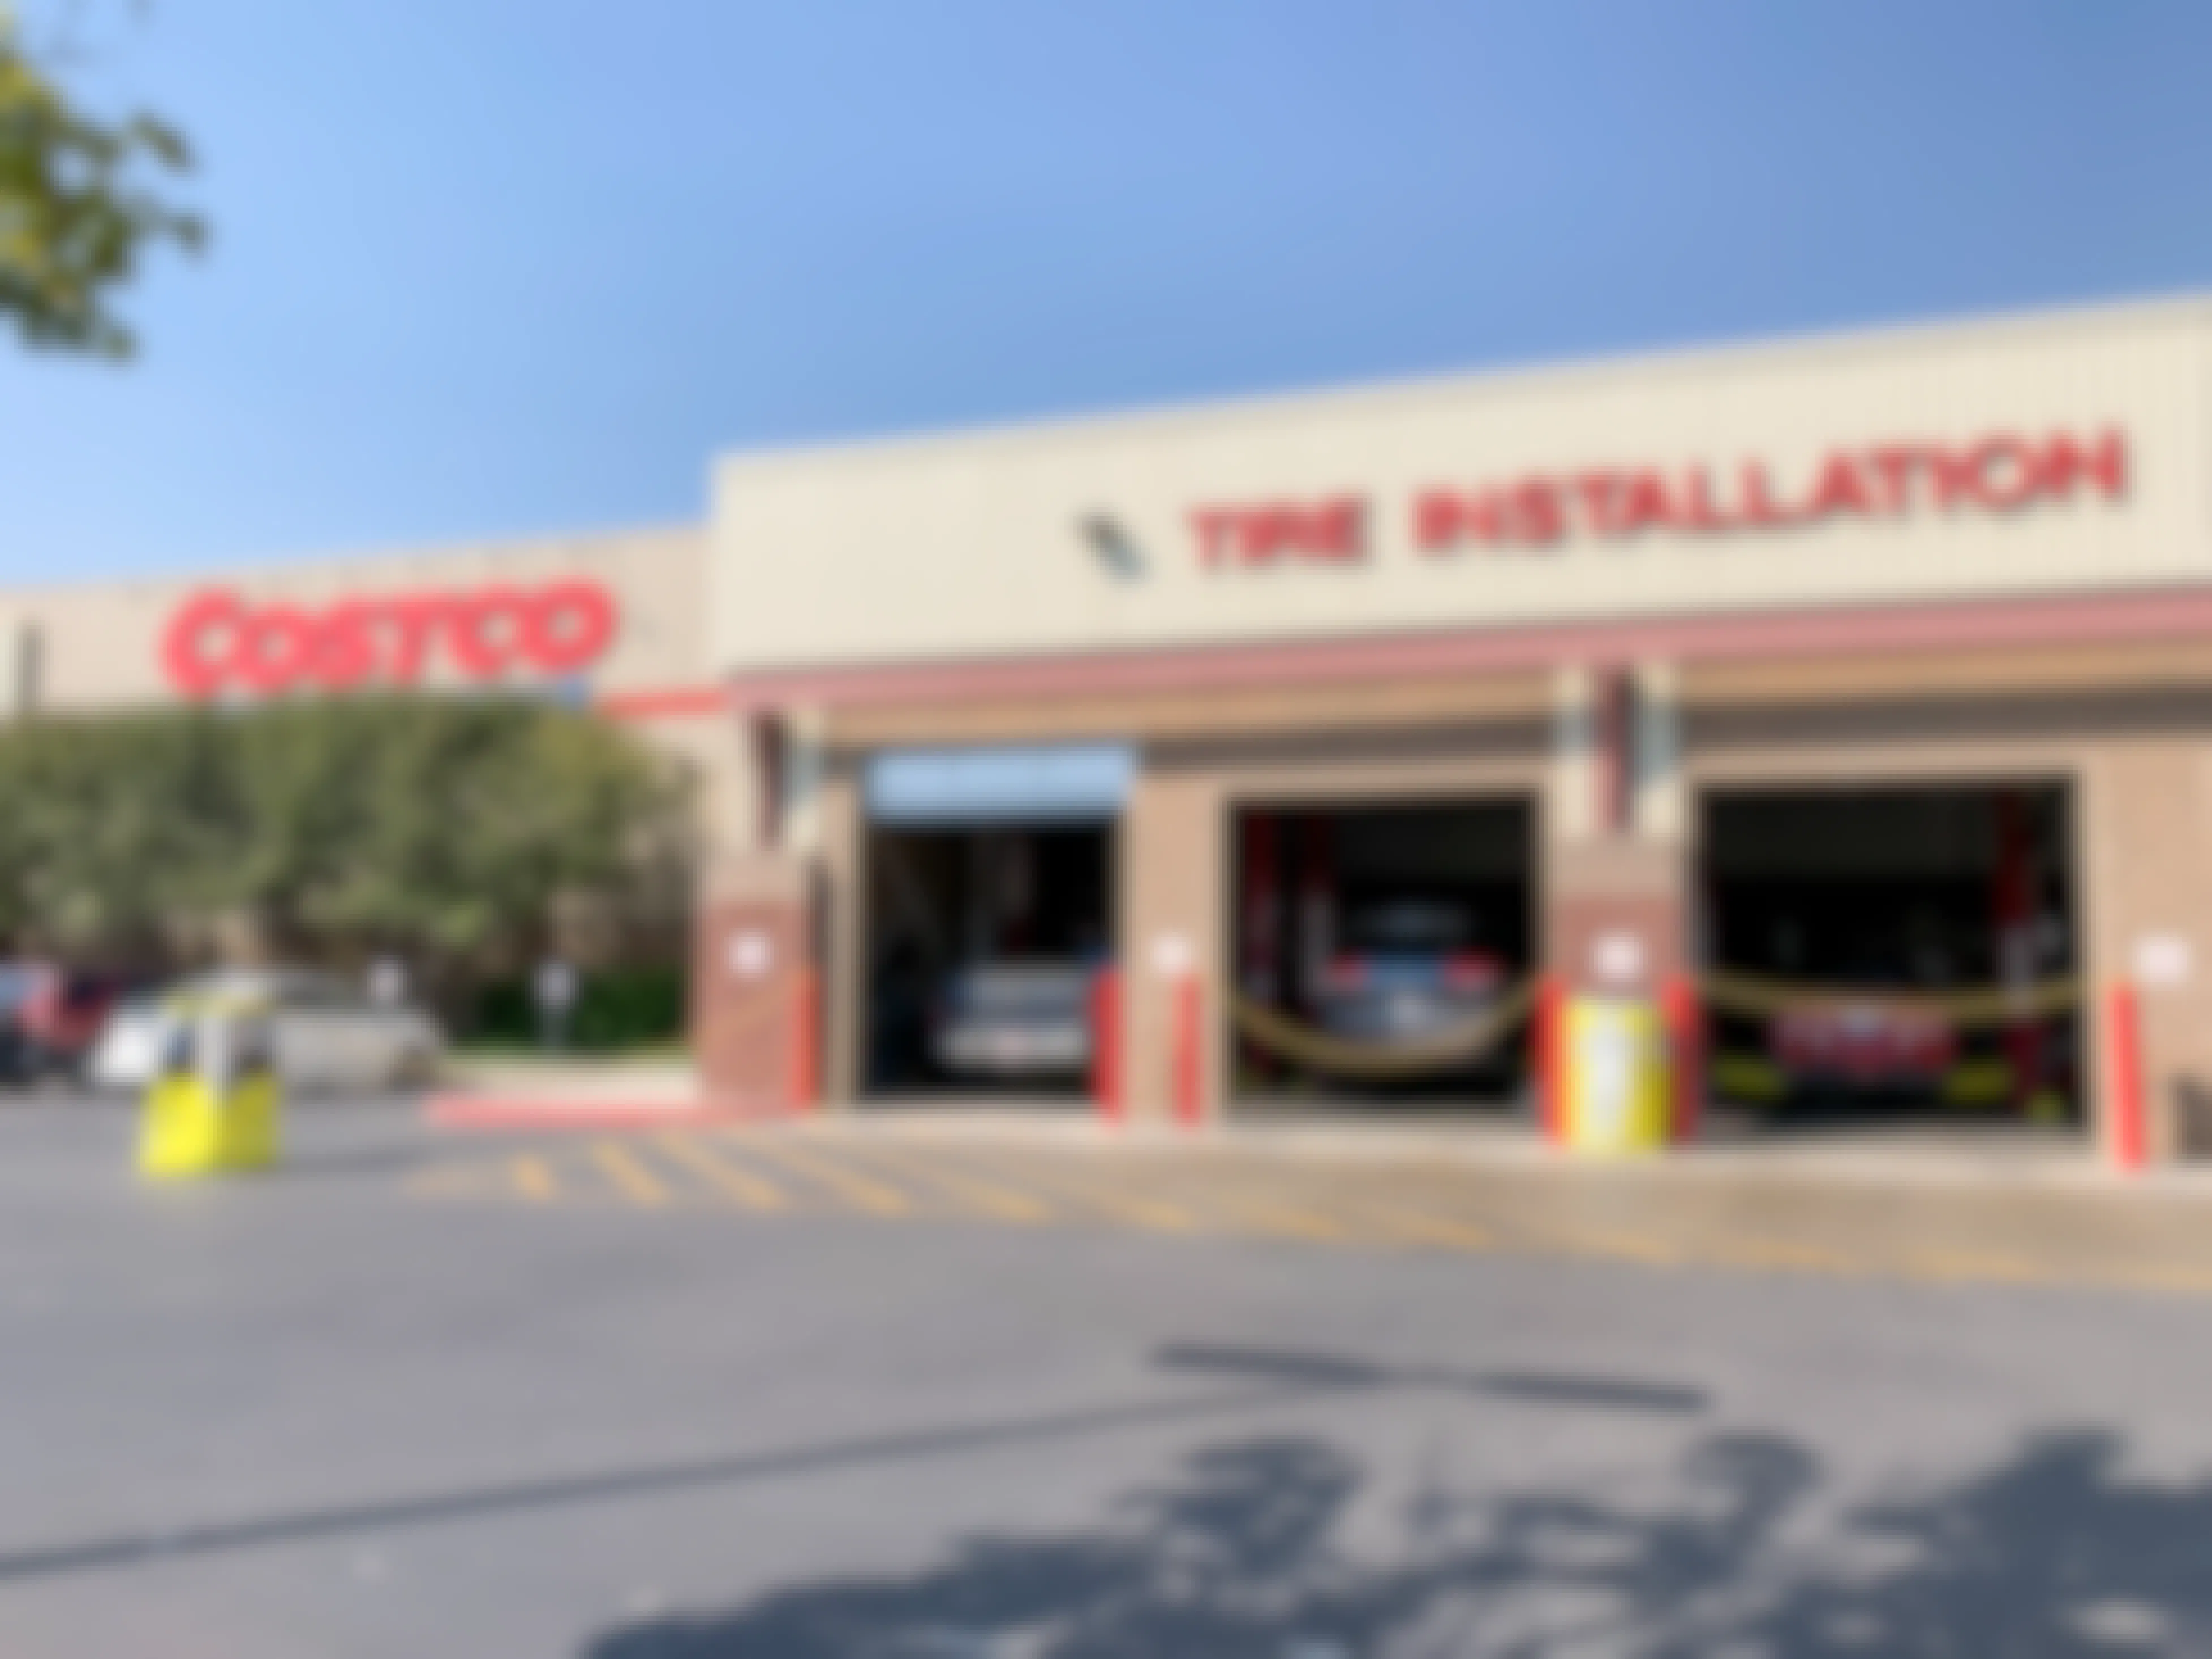 The outside of a Costco Tire Installation garage with cars inside.